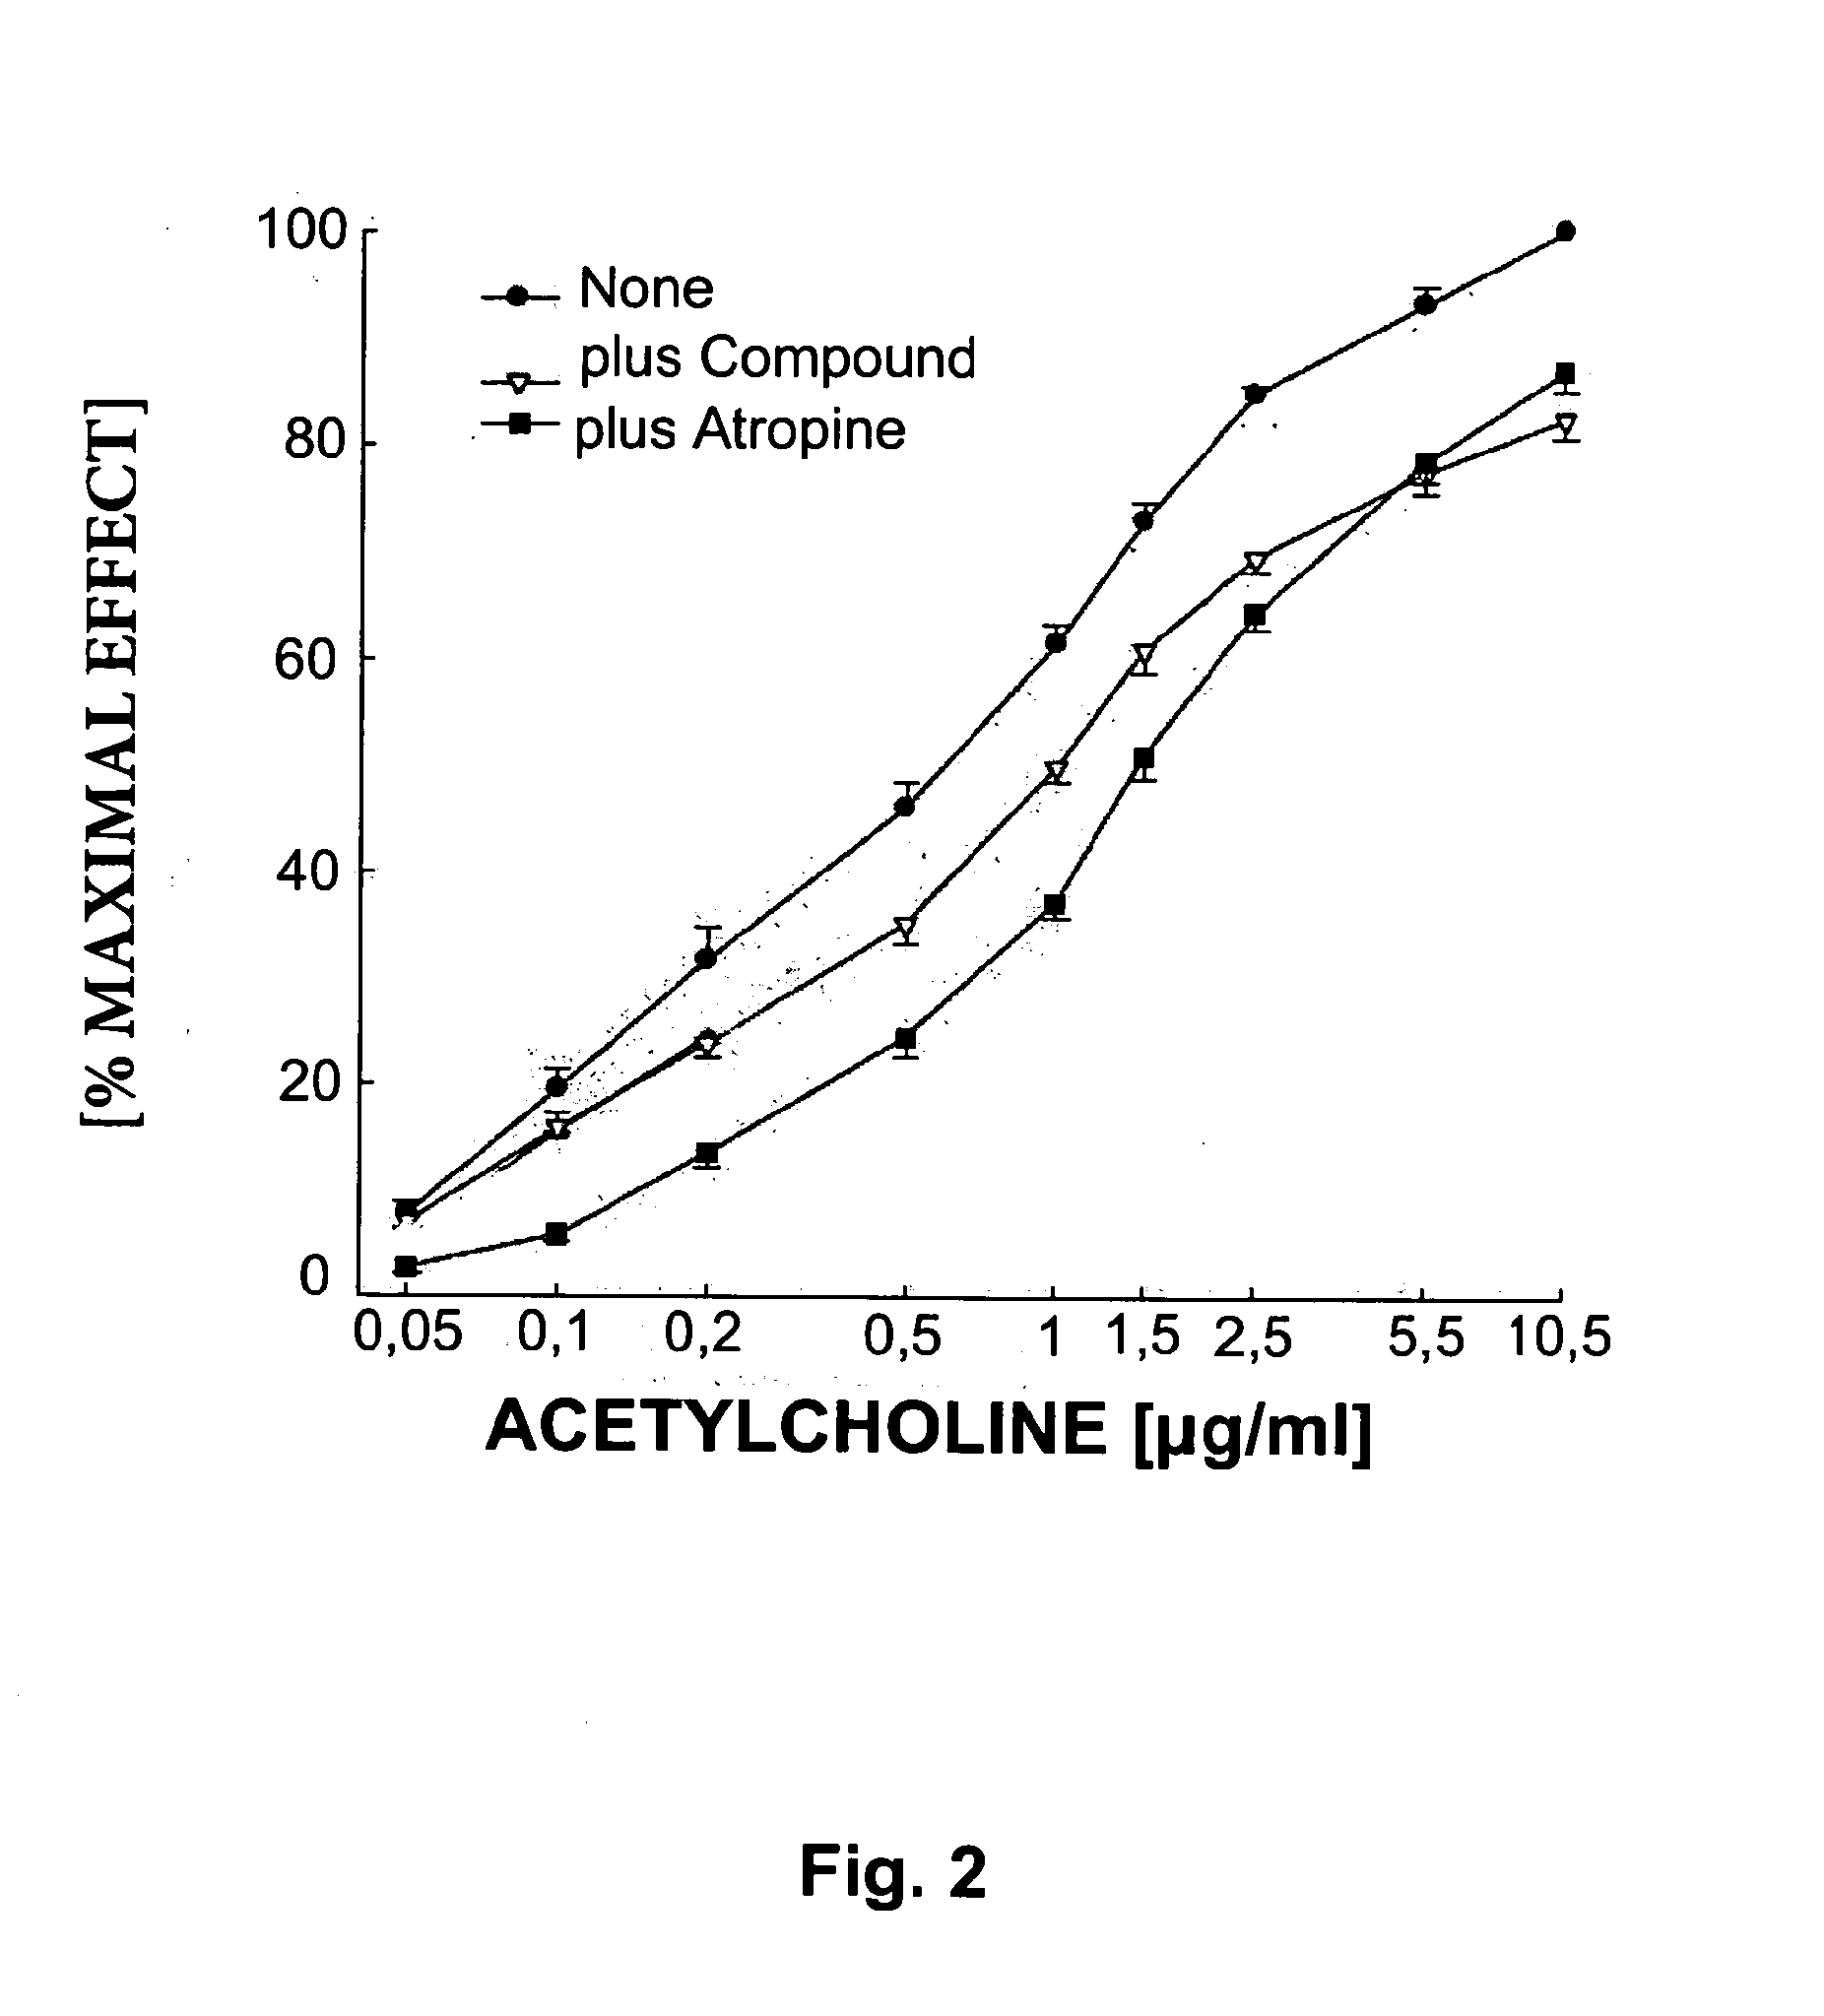 Vicenin 2 and analogues thereof for use as an antispasmodic and/or prokinetic agent